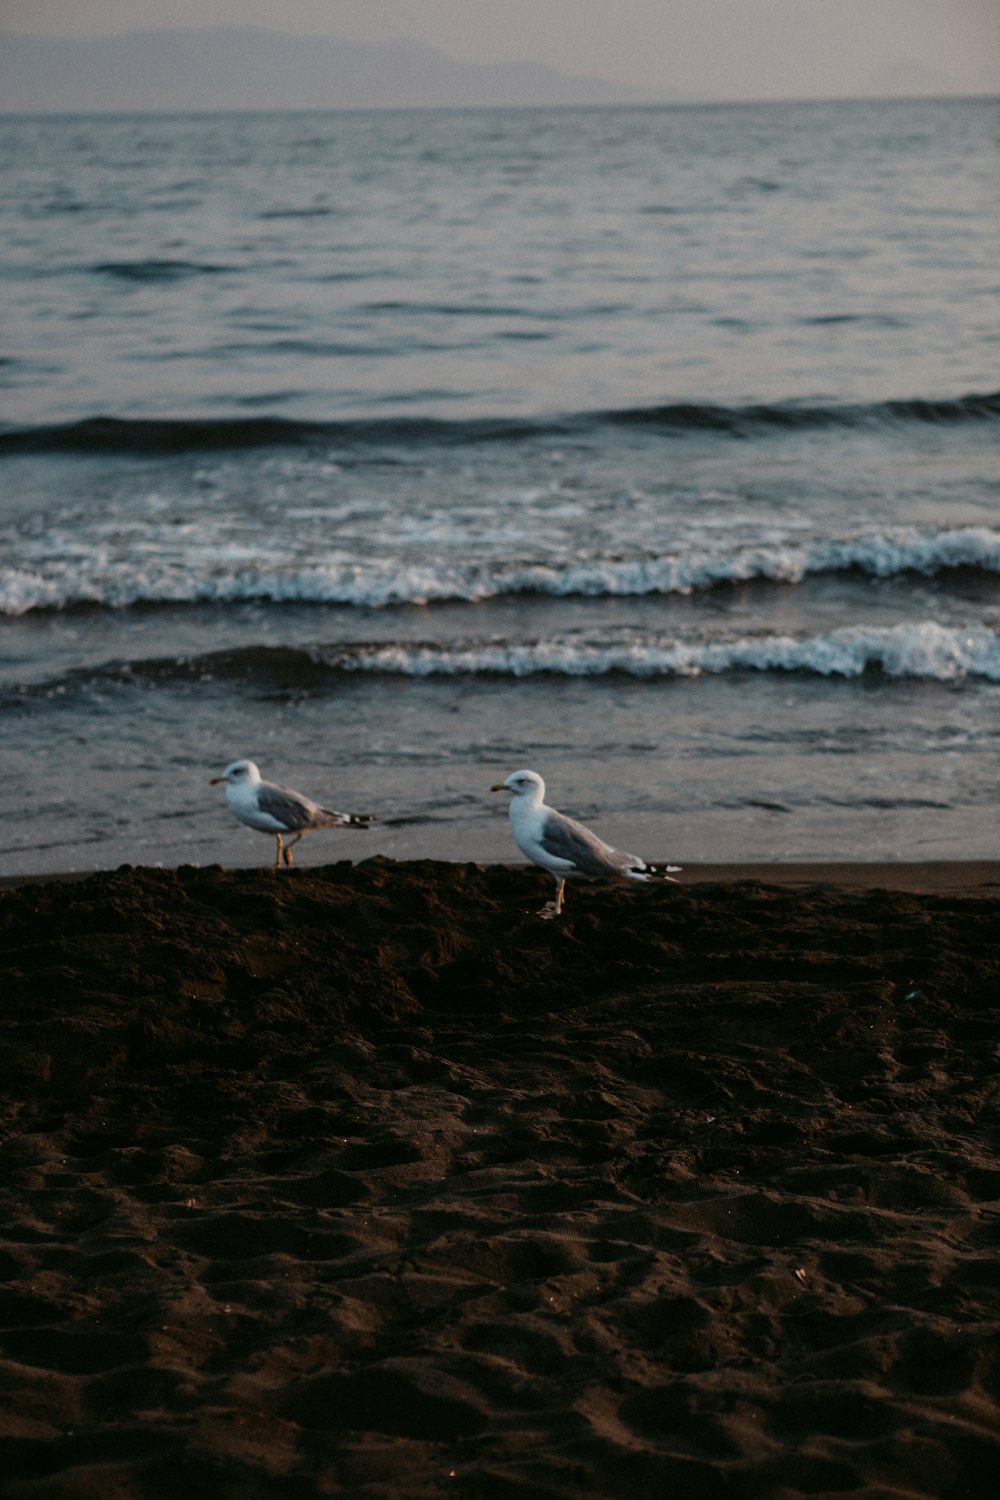 two seagulls standing on the sand of a beach